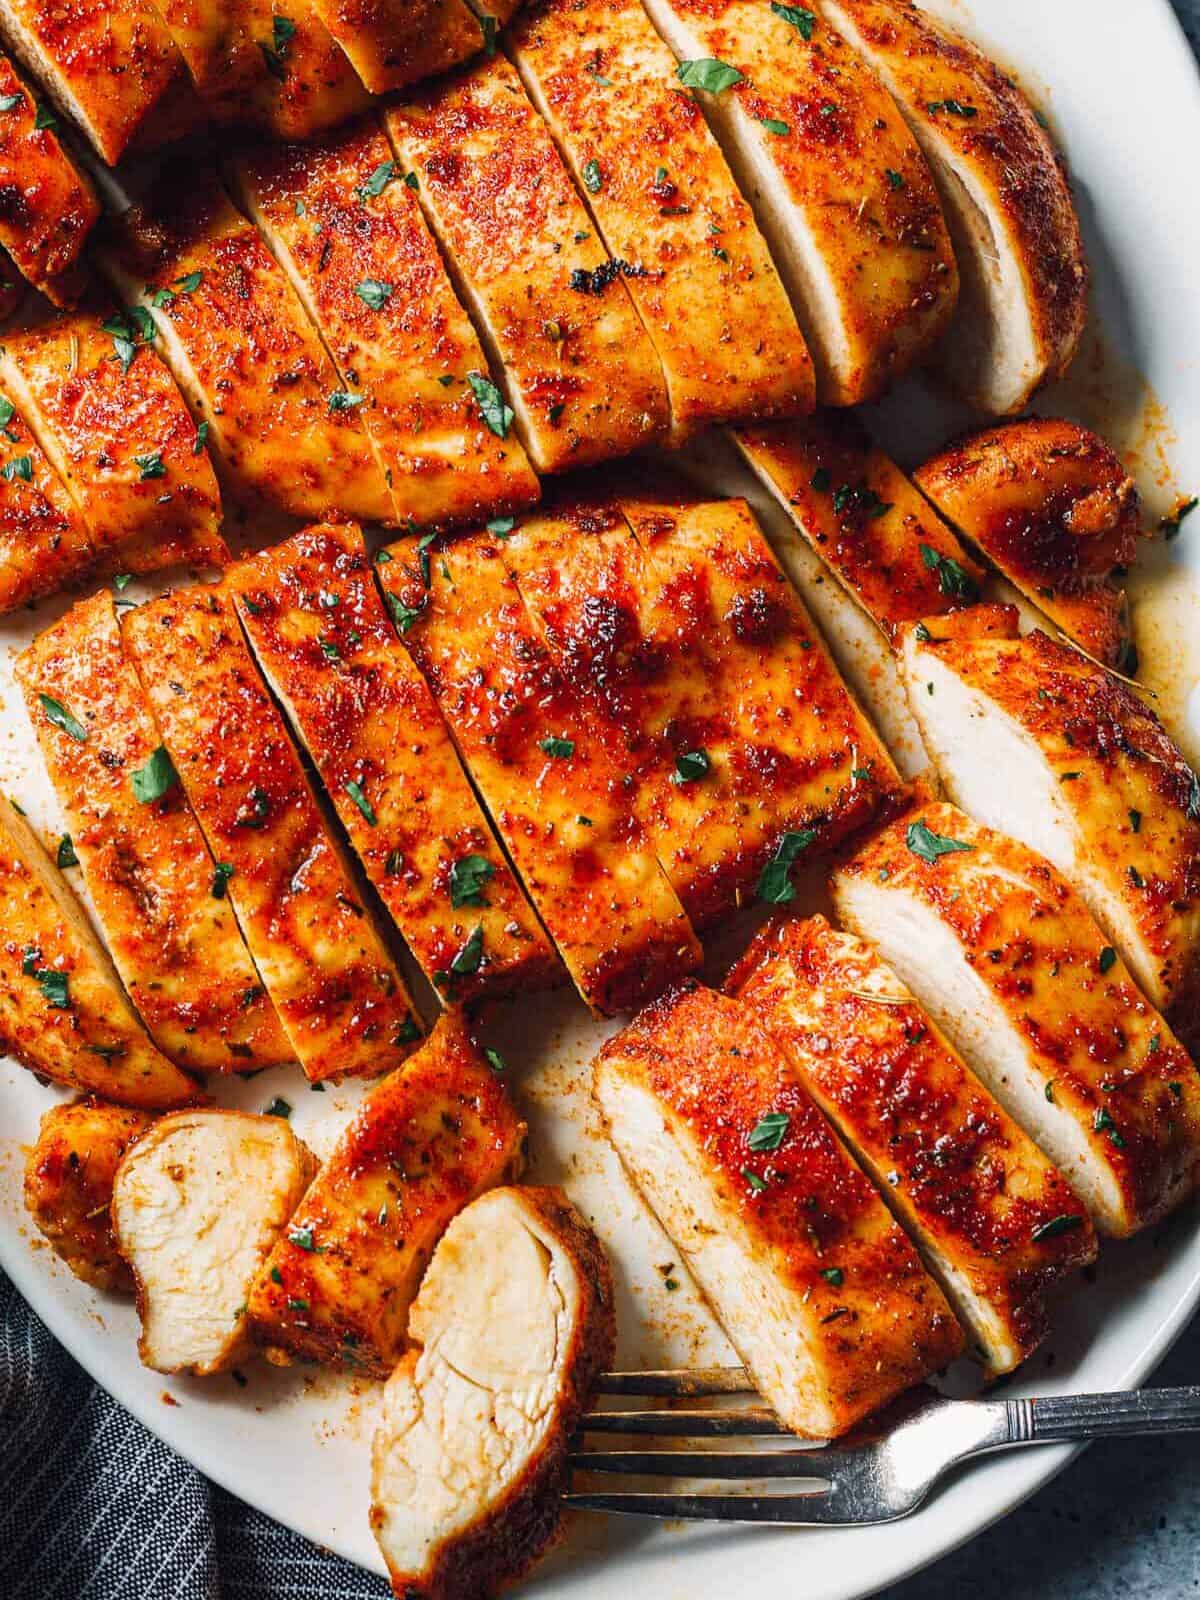 a plate of baked chicken breast seasoned with brown sugar and Italian seasoning, cut into slices